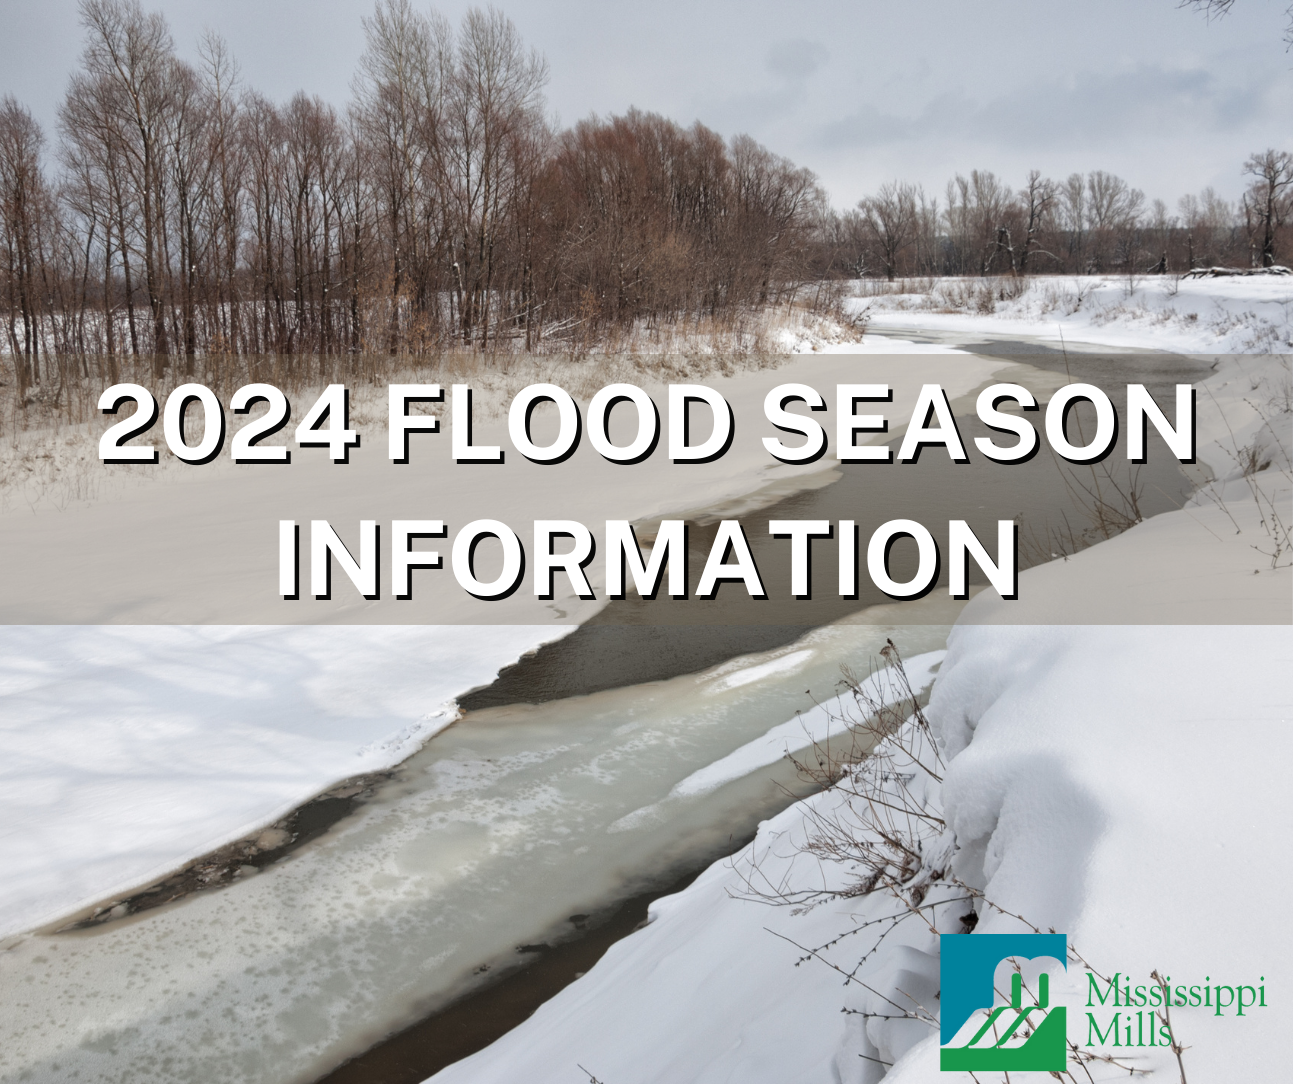 Photo of rushing water with text 'Flood Season Information'